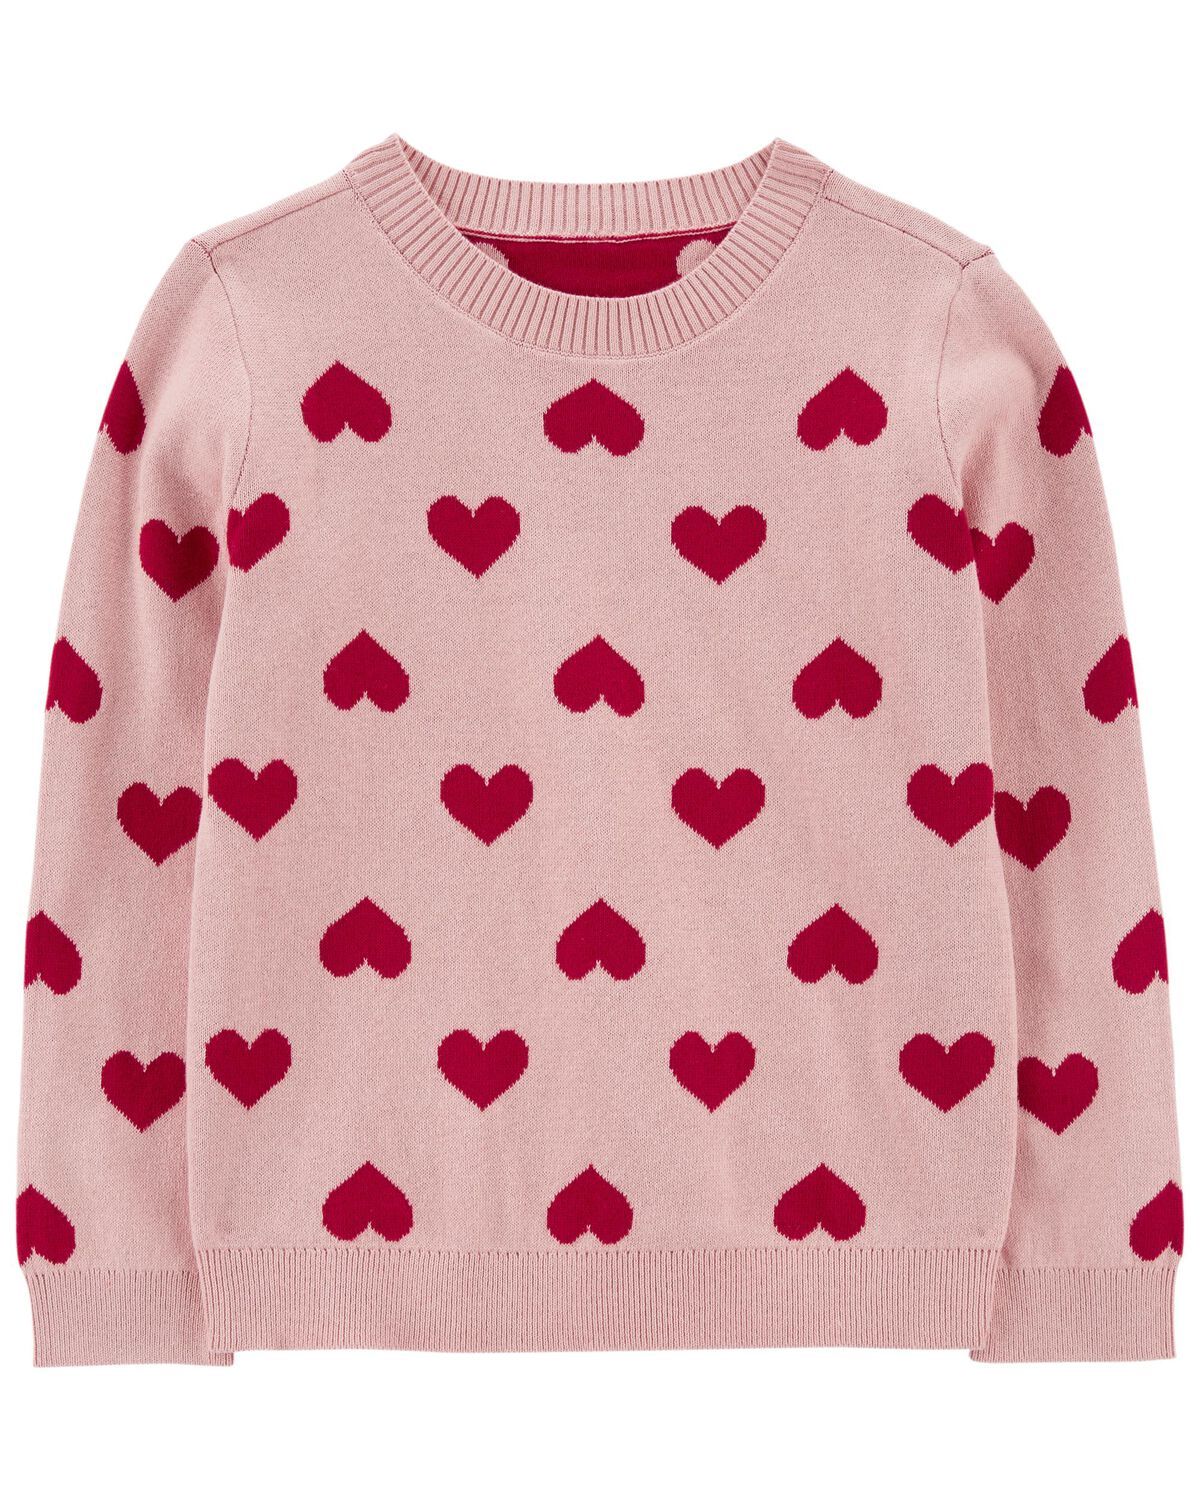 Pink Kid Valentine's Day Heart Sweater | carters.com | Carter's